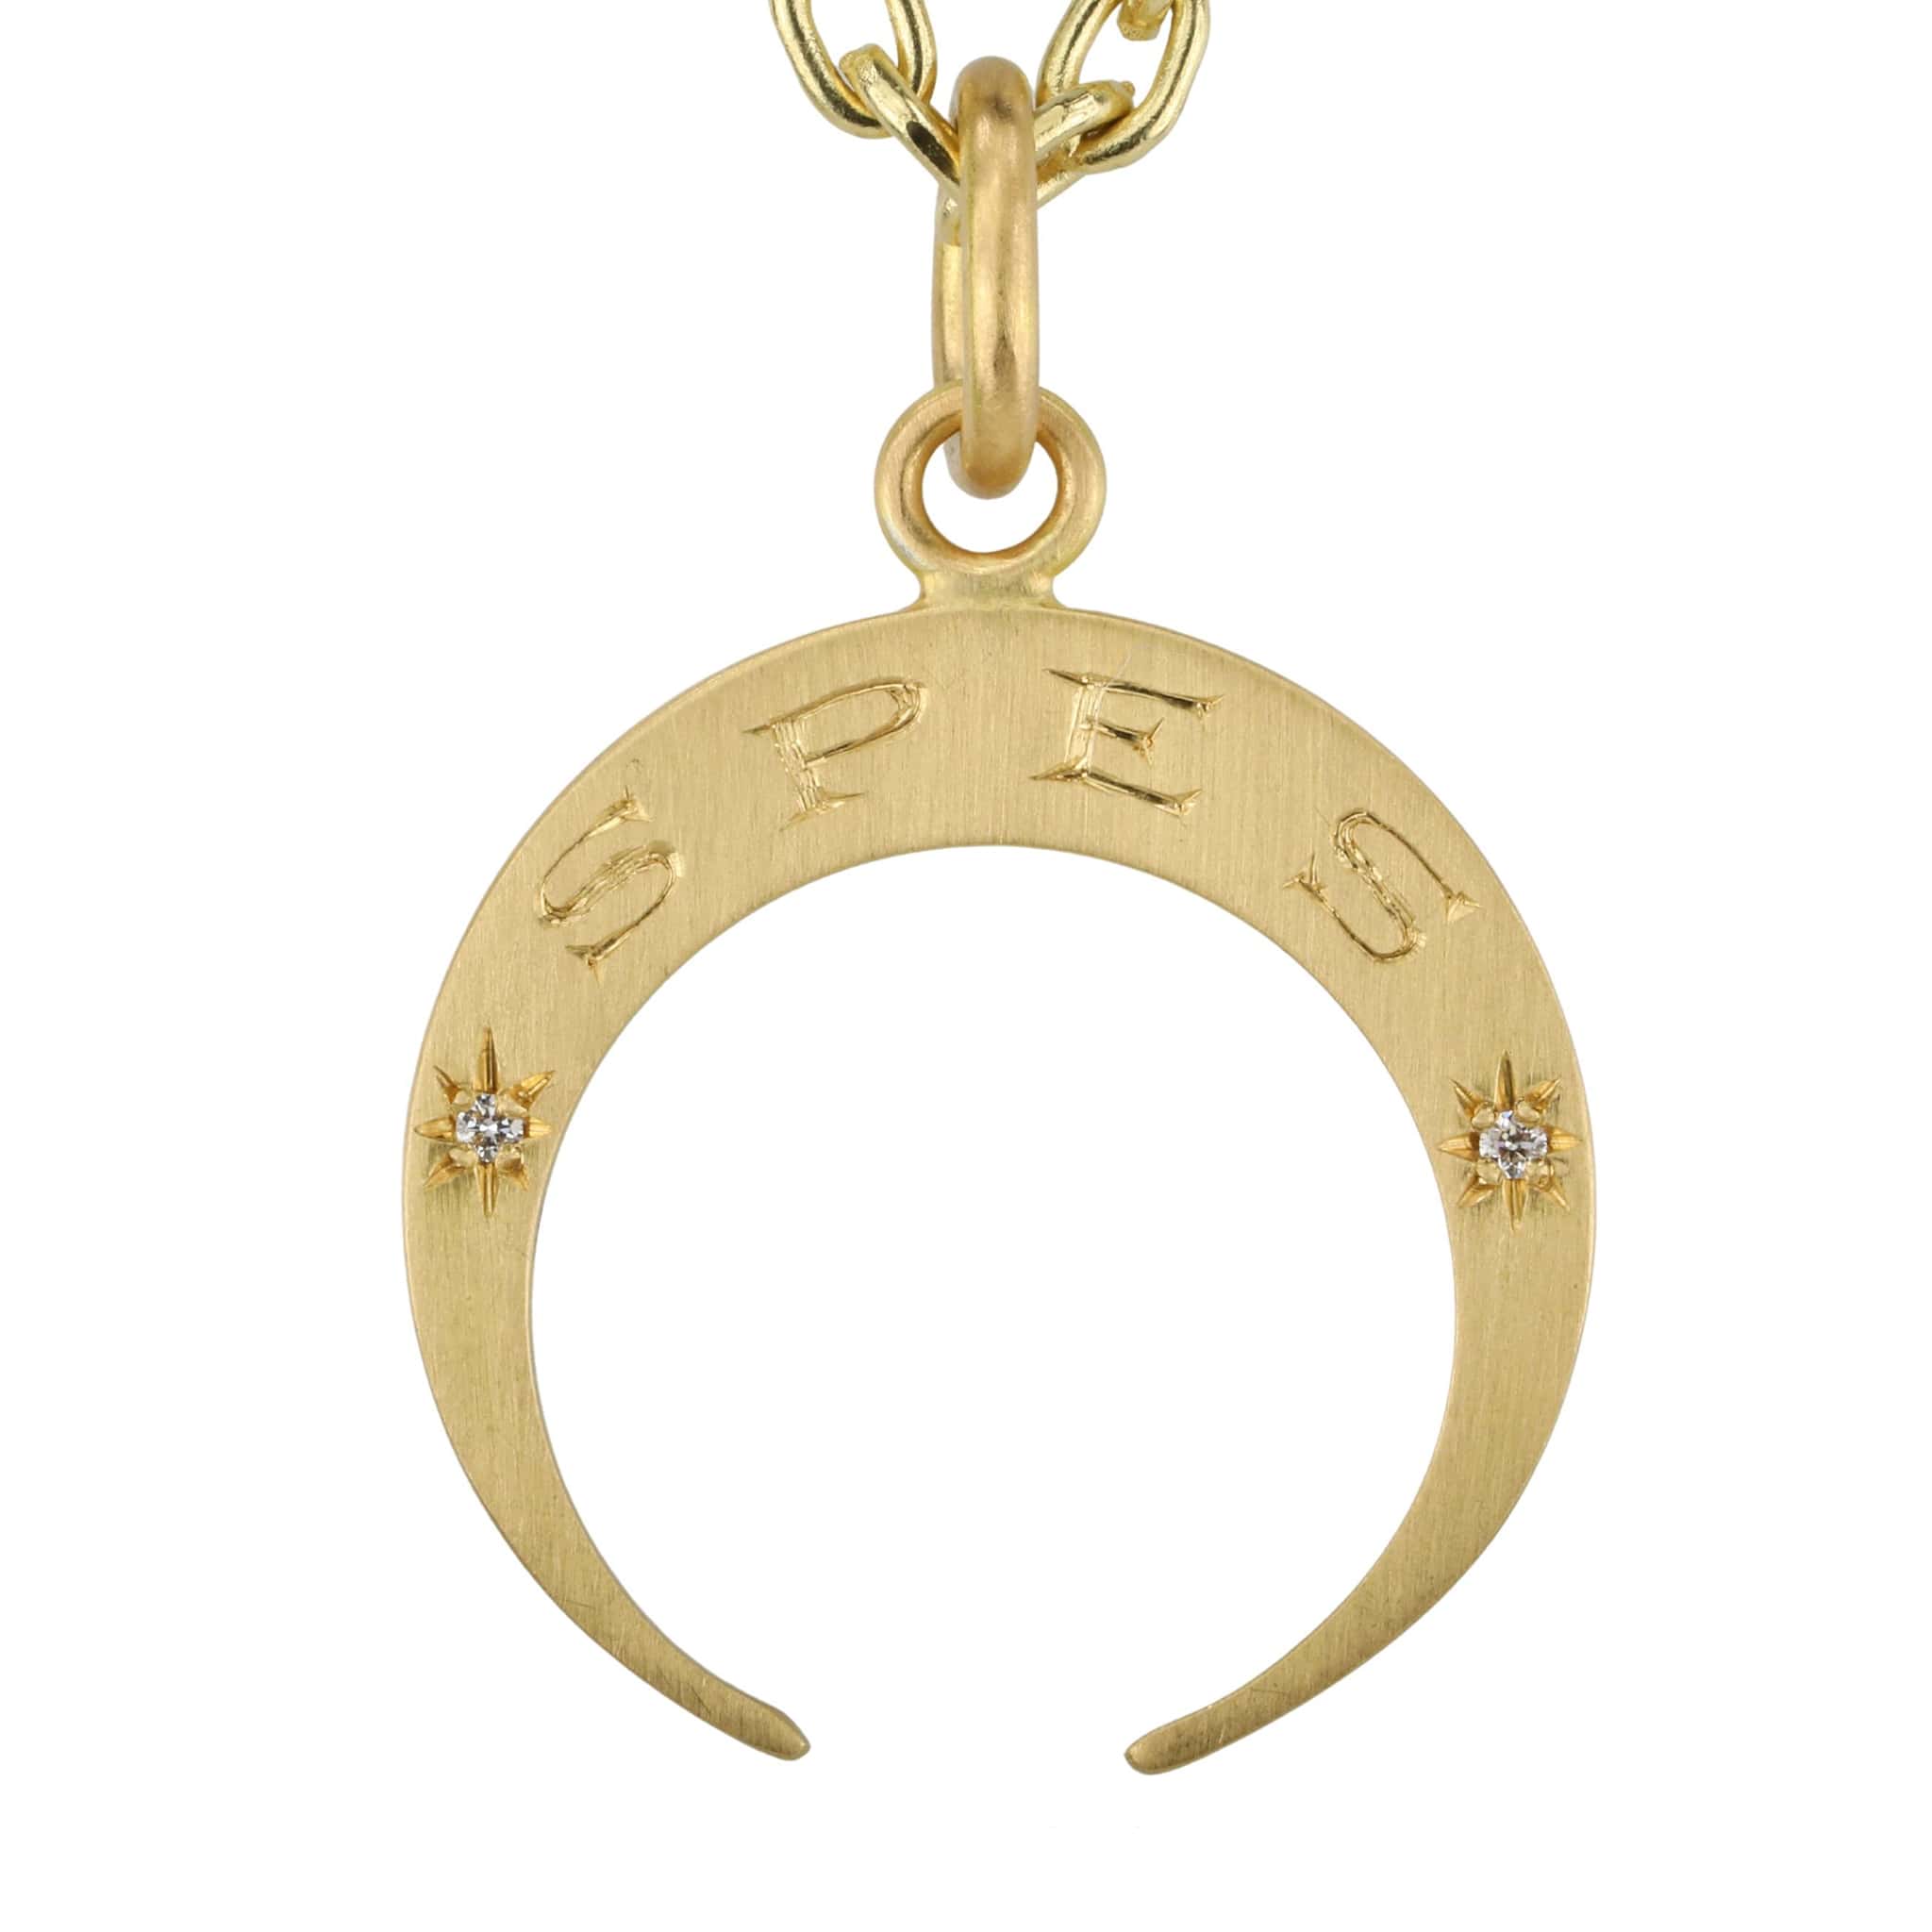 20K Gold Crescent Engraved SPES &amp; OPES Pendant with 4 Star Set Diamonds